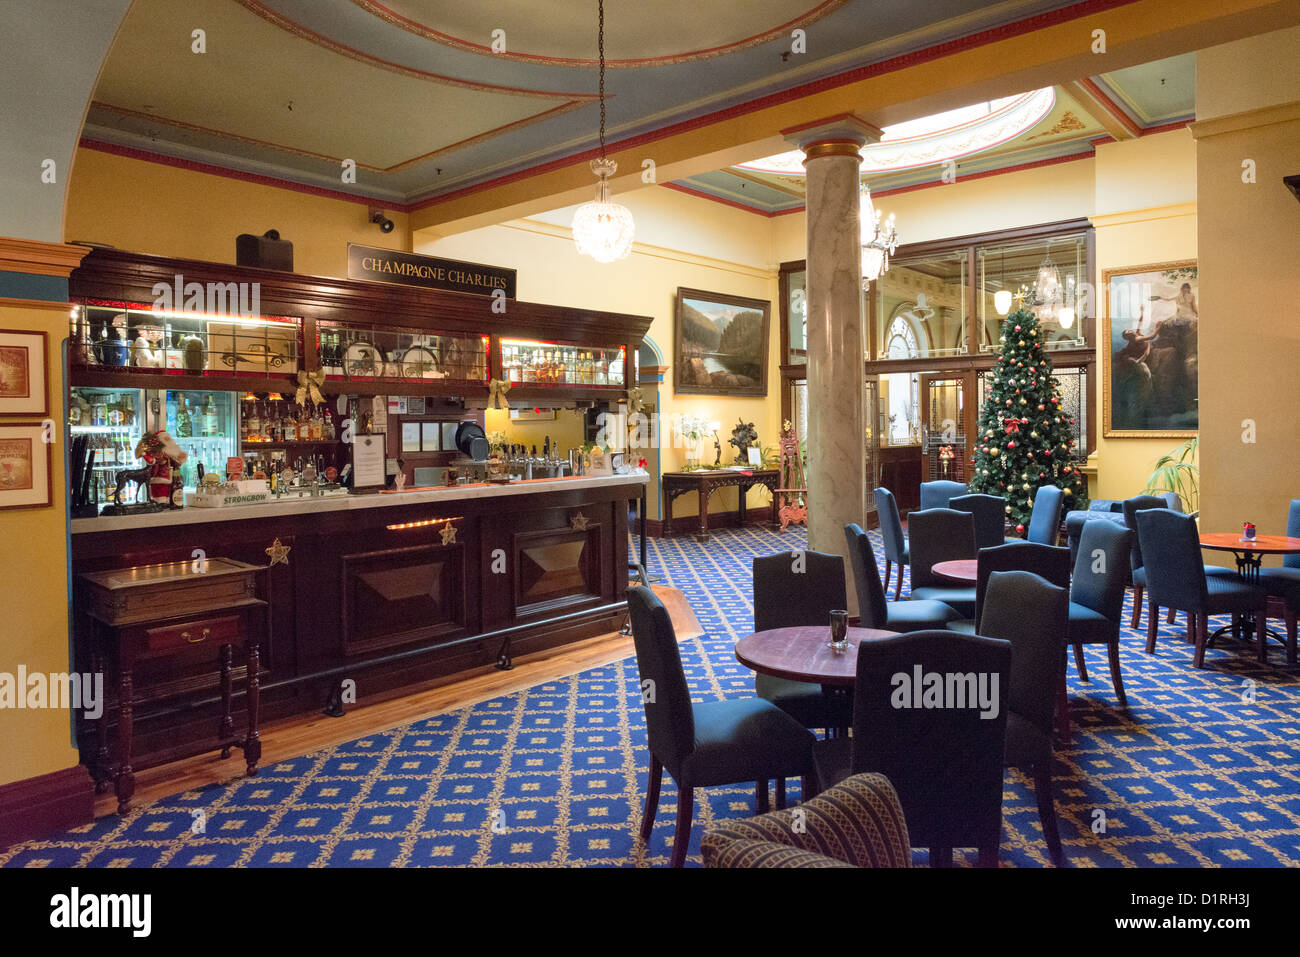 KATOOMBA, Australia - The bar, Champagne Charlies, inside the historic Carrington Hotel in Katoomba in the Blue Mountains of New South Wales, Australia. The Carrington is an historic hotel established in 1880. Stock Photo